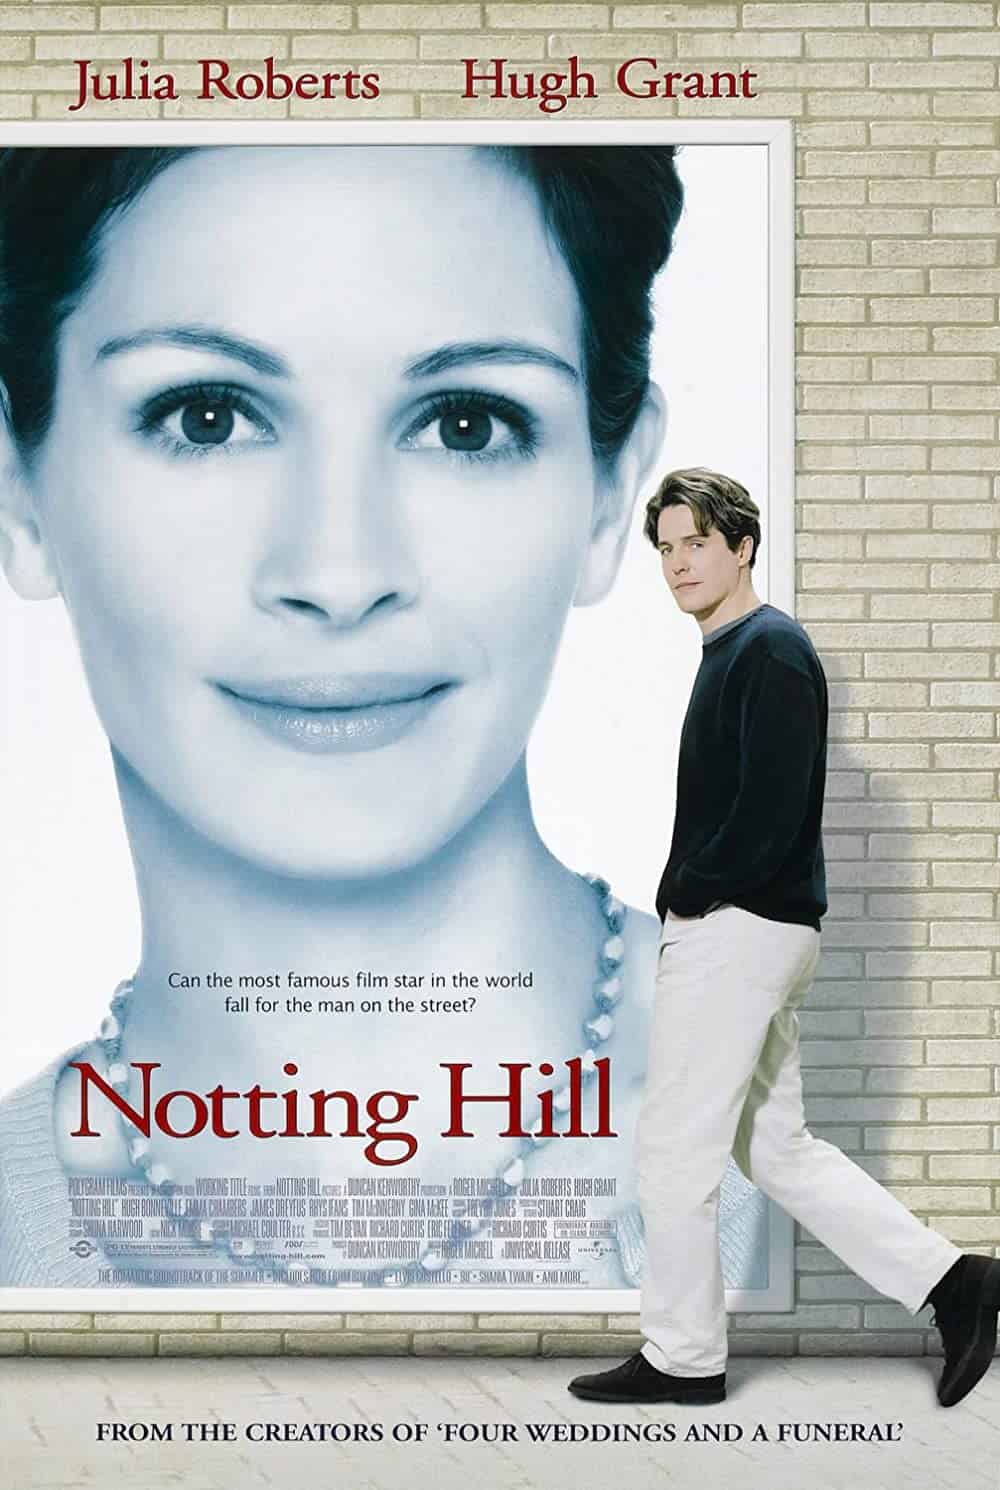 Notting Hill (1999) Best Julia Roberts Movies (Ranked)